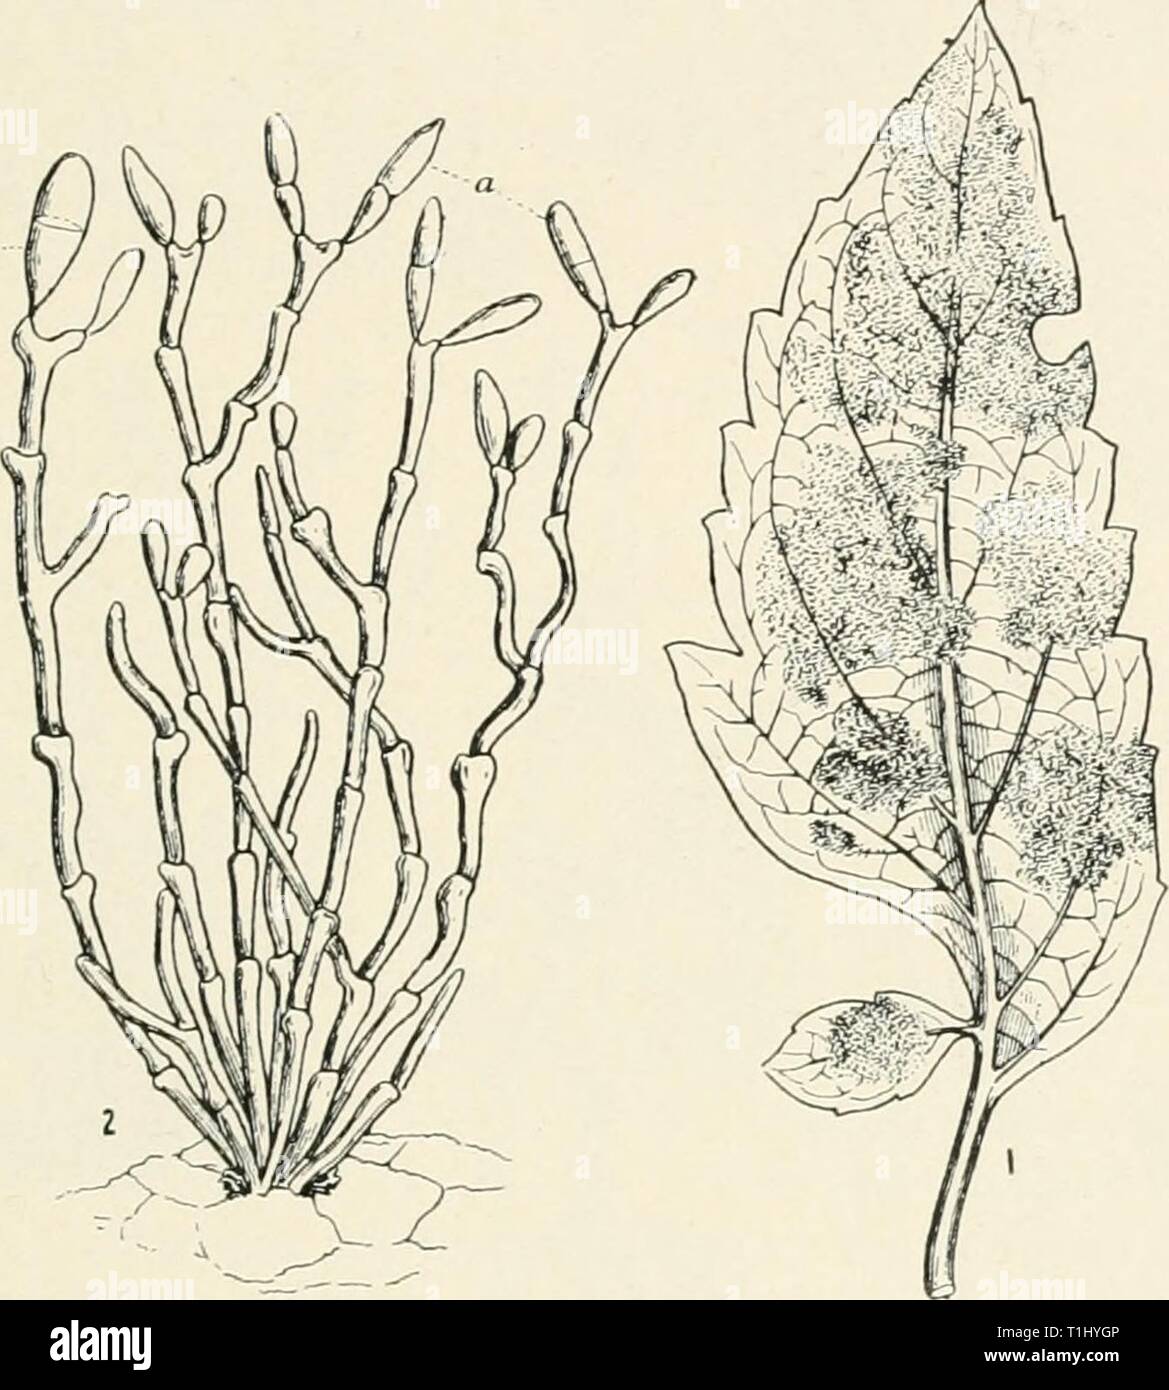 Diseases of cultivated plants and Diseases of cultivated plants and trees  diseasesofcultiv00massuoft Year: [1910?]  CLADOSPORIUM 471 stem of diseased plants. The young fruit is also sometimes attacked. The fungus is Cladosporiiim fiilvum (Cke.) The conidiophores are densely crowded, and emerge through the cuticle in clusters. They are usually sparingly branched, septate, and nodulose, bearing a few conidia near the apex, tinged brown; conidia elliptic-oblong, i-septate, translucent, tawny-brown, 10-20X4-6 /x. Spray with a dilute solution of potassium sulphide, or with    Fig. 140. — Cladospor Stock Photo